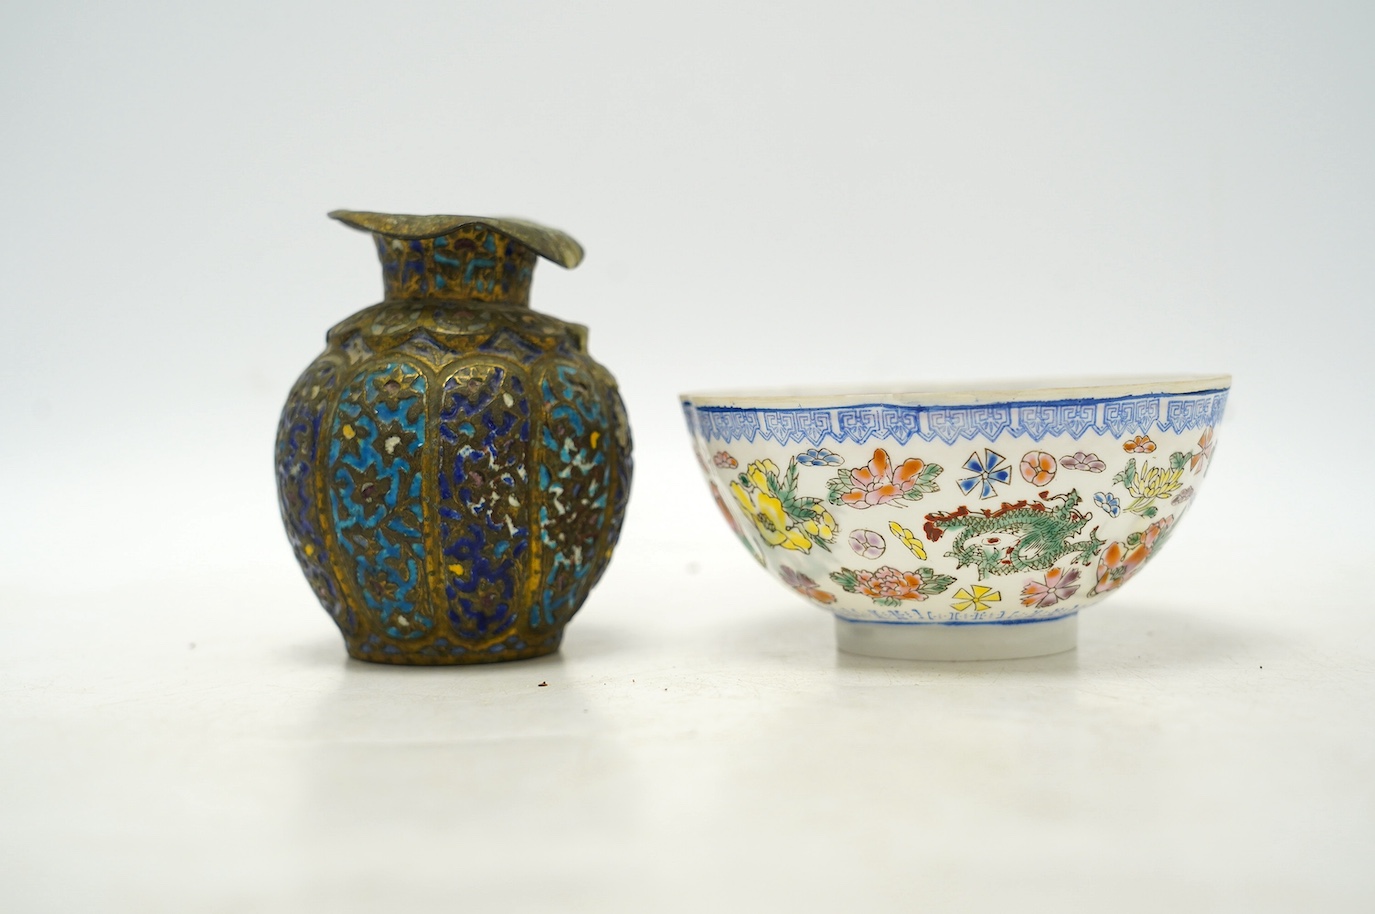 An early 20th century Chinese eggshell porcelain bowl and an enamelled bronze vase, tallest 9cm. Condition - poor